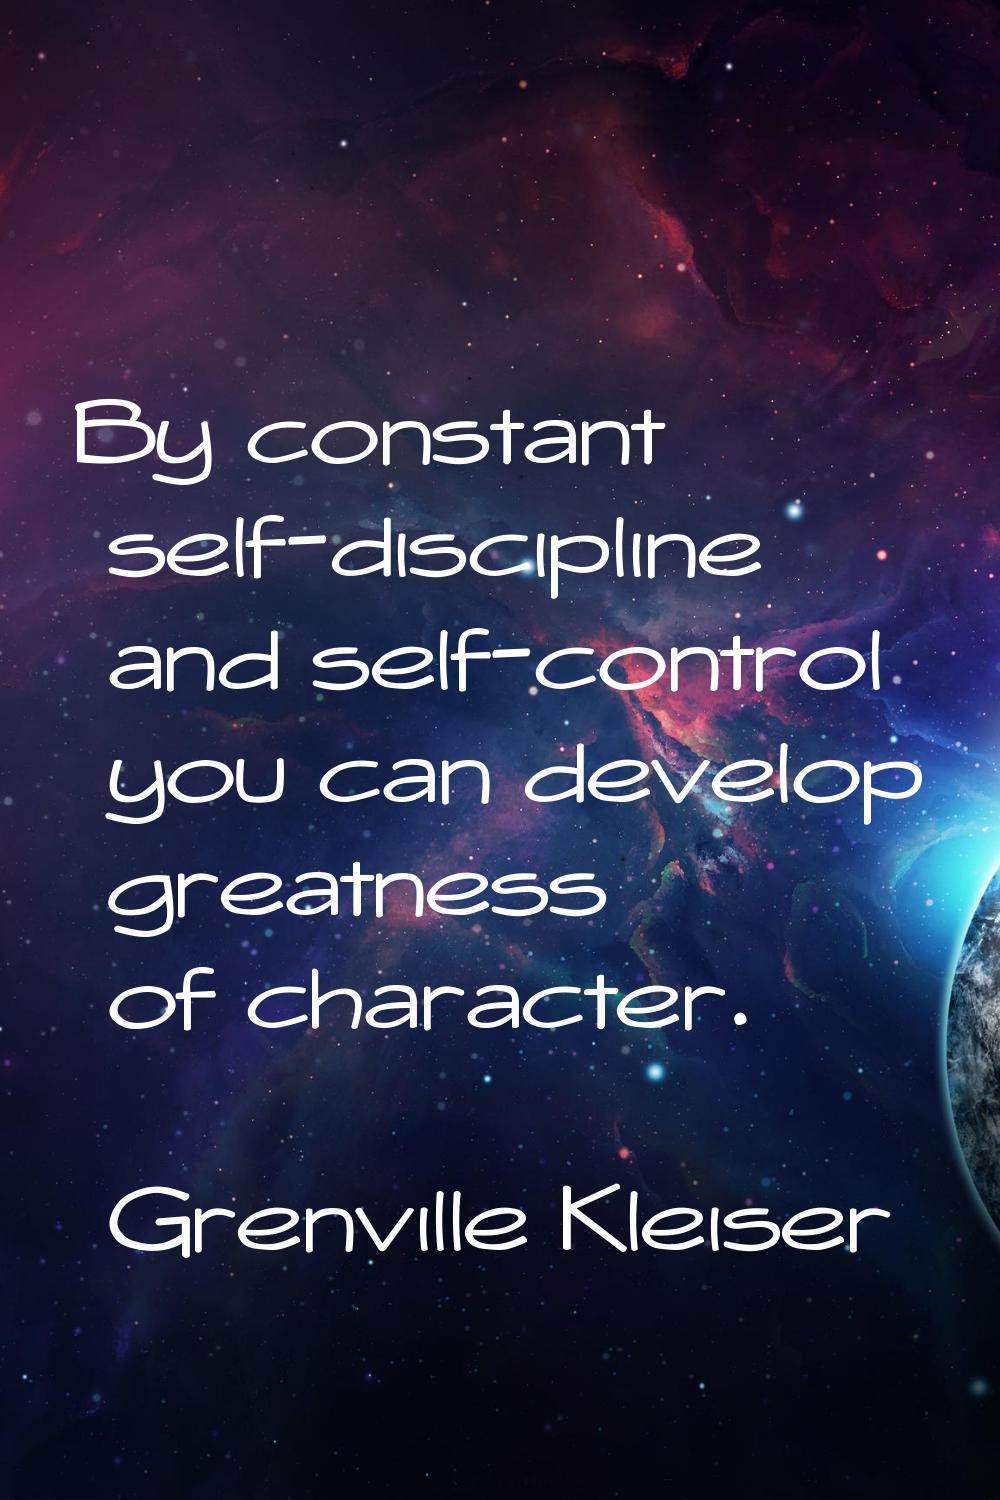 By constant self-discipline and self-control you can develop greatness of character.